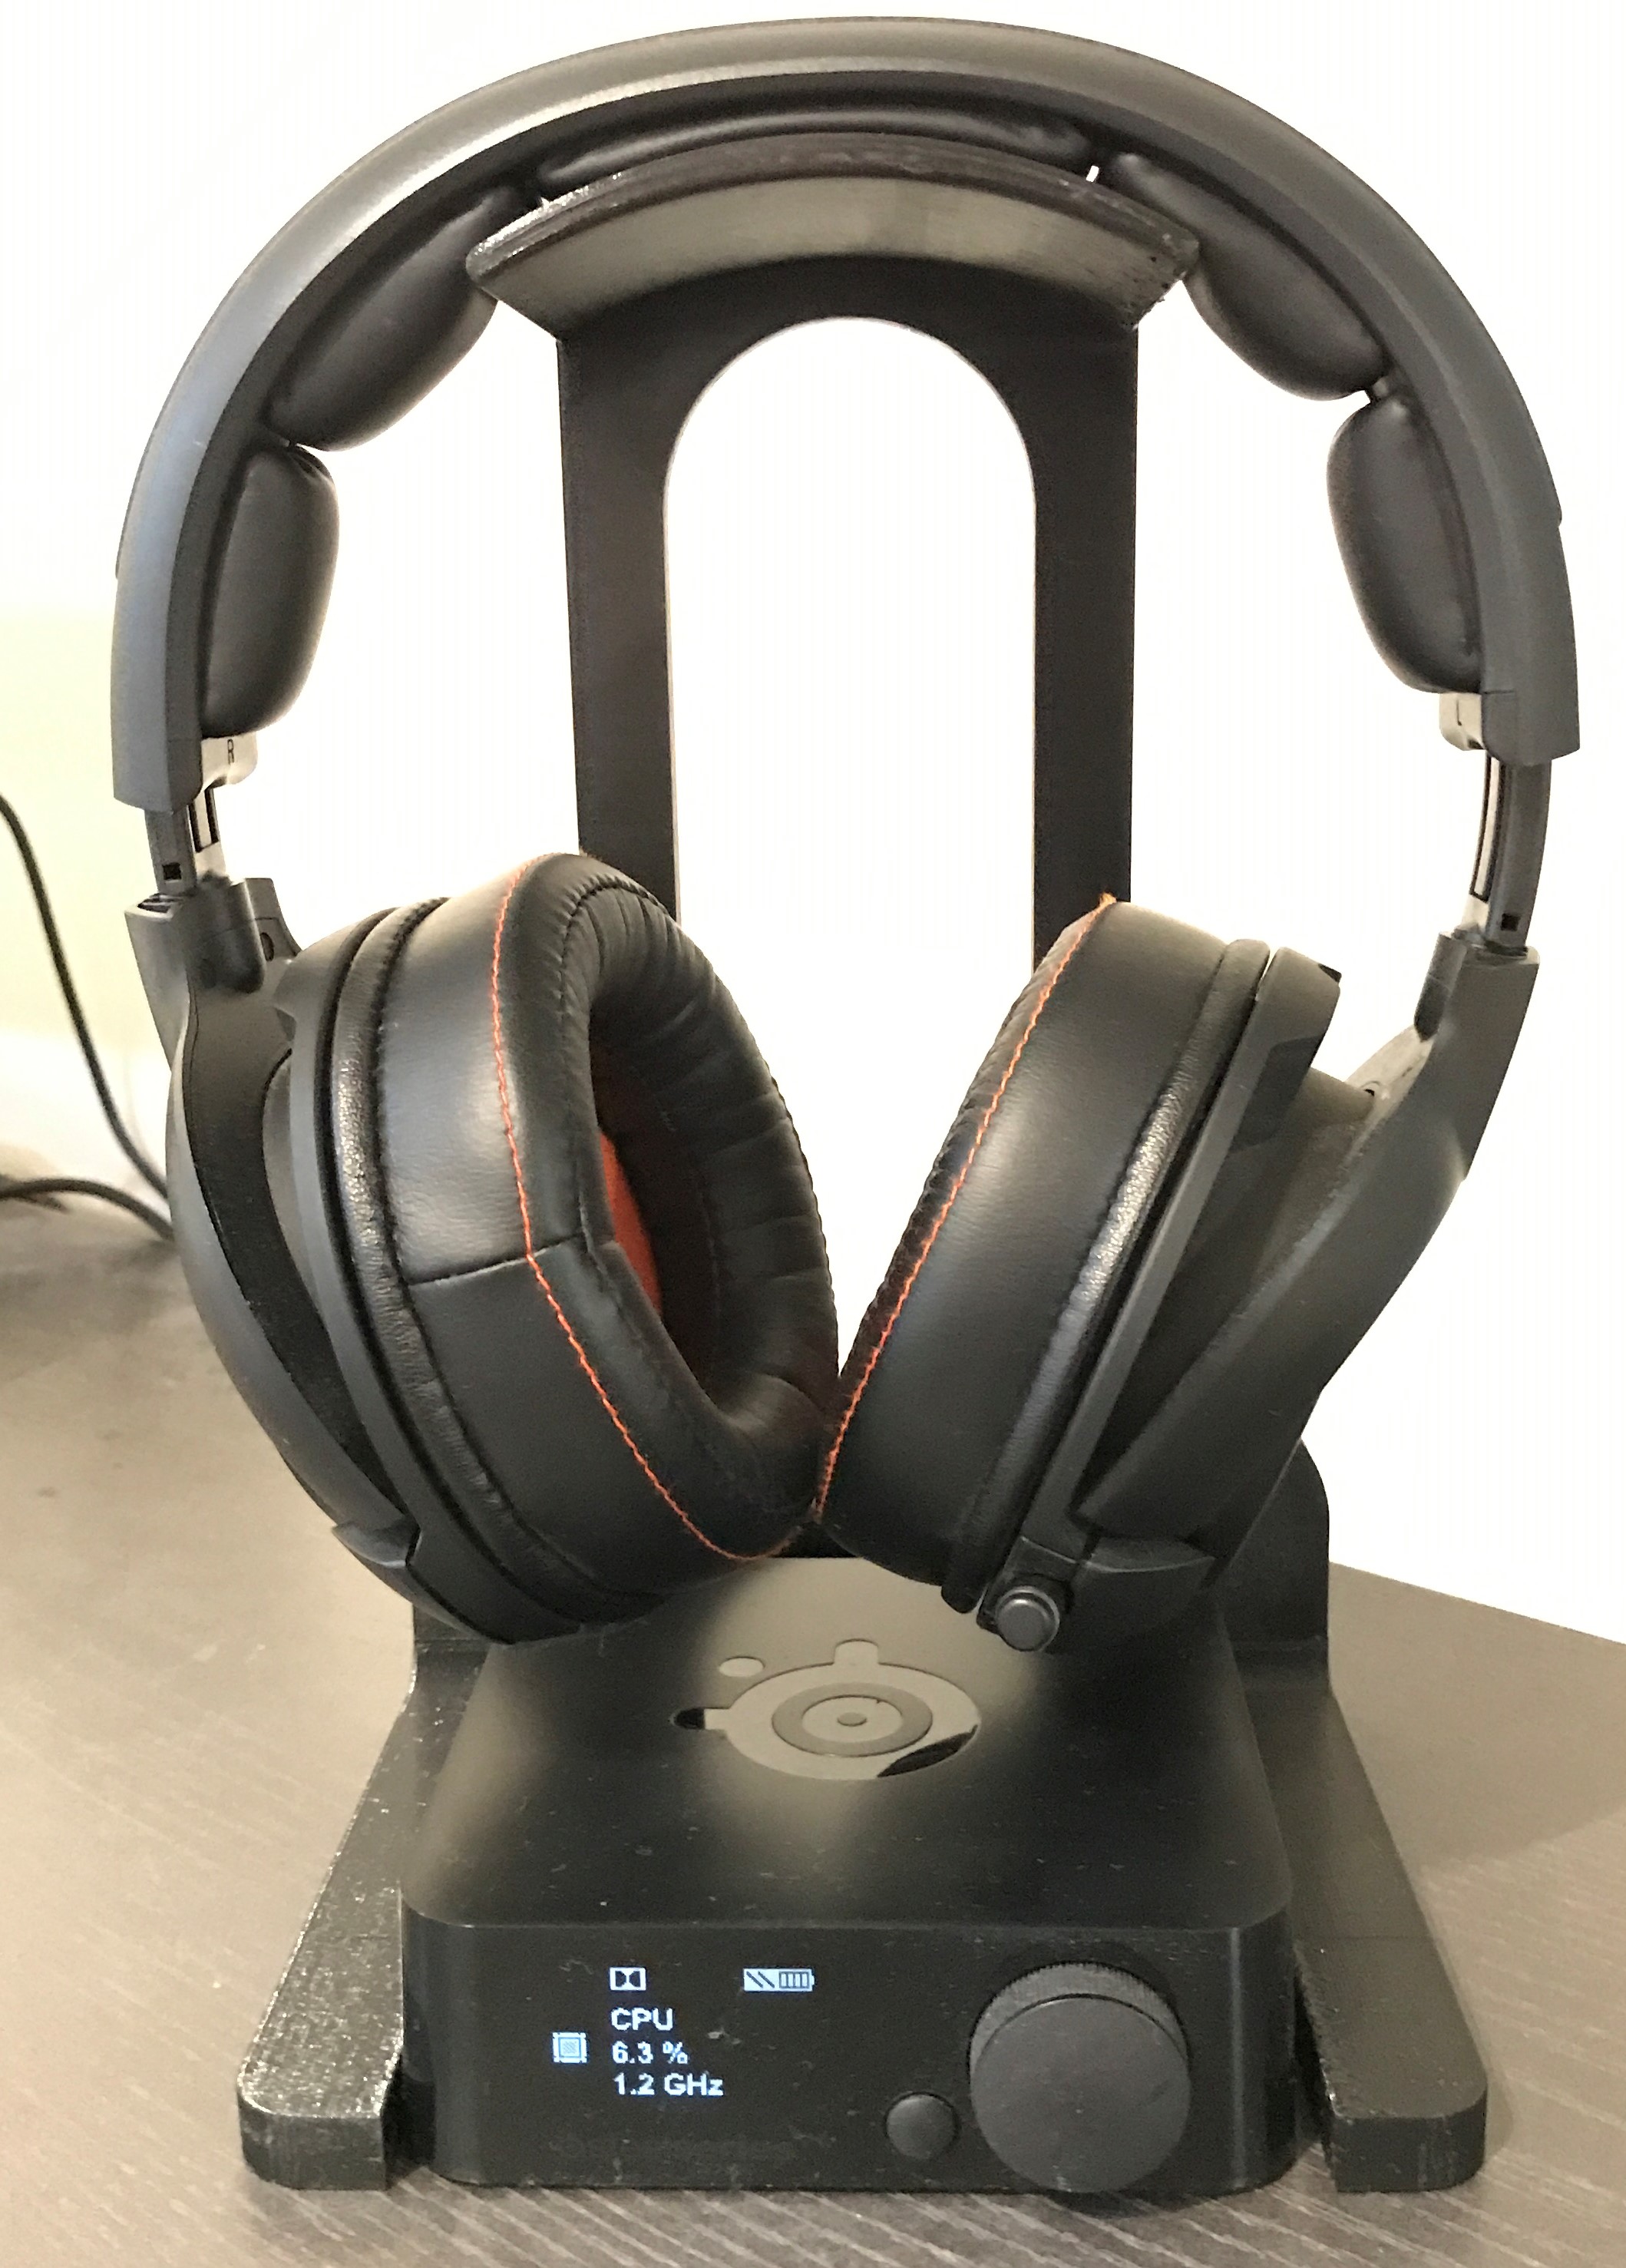 Steelseries Wireless Headset stand